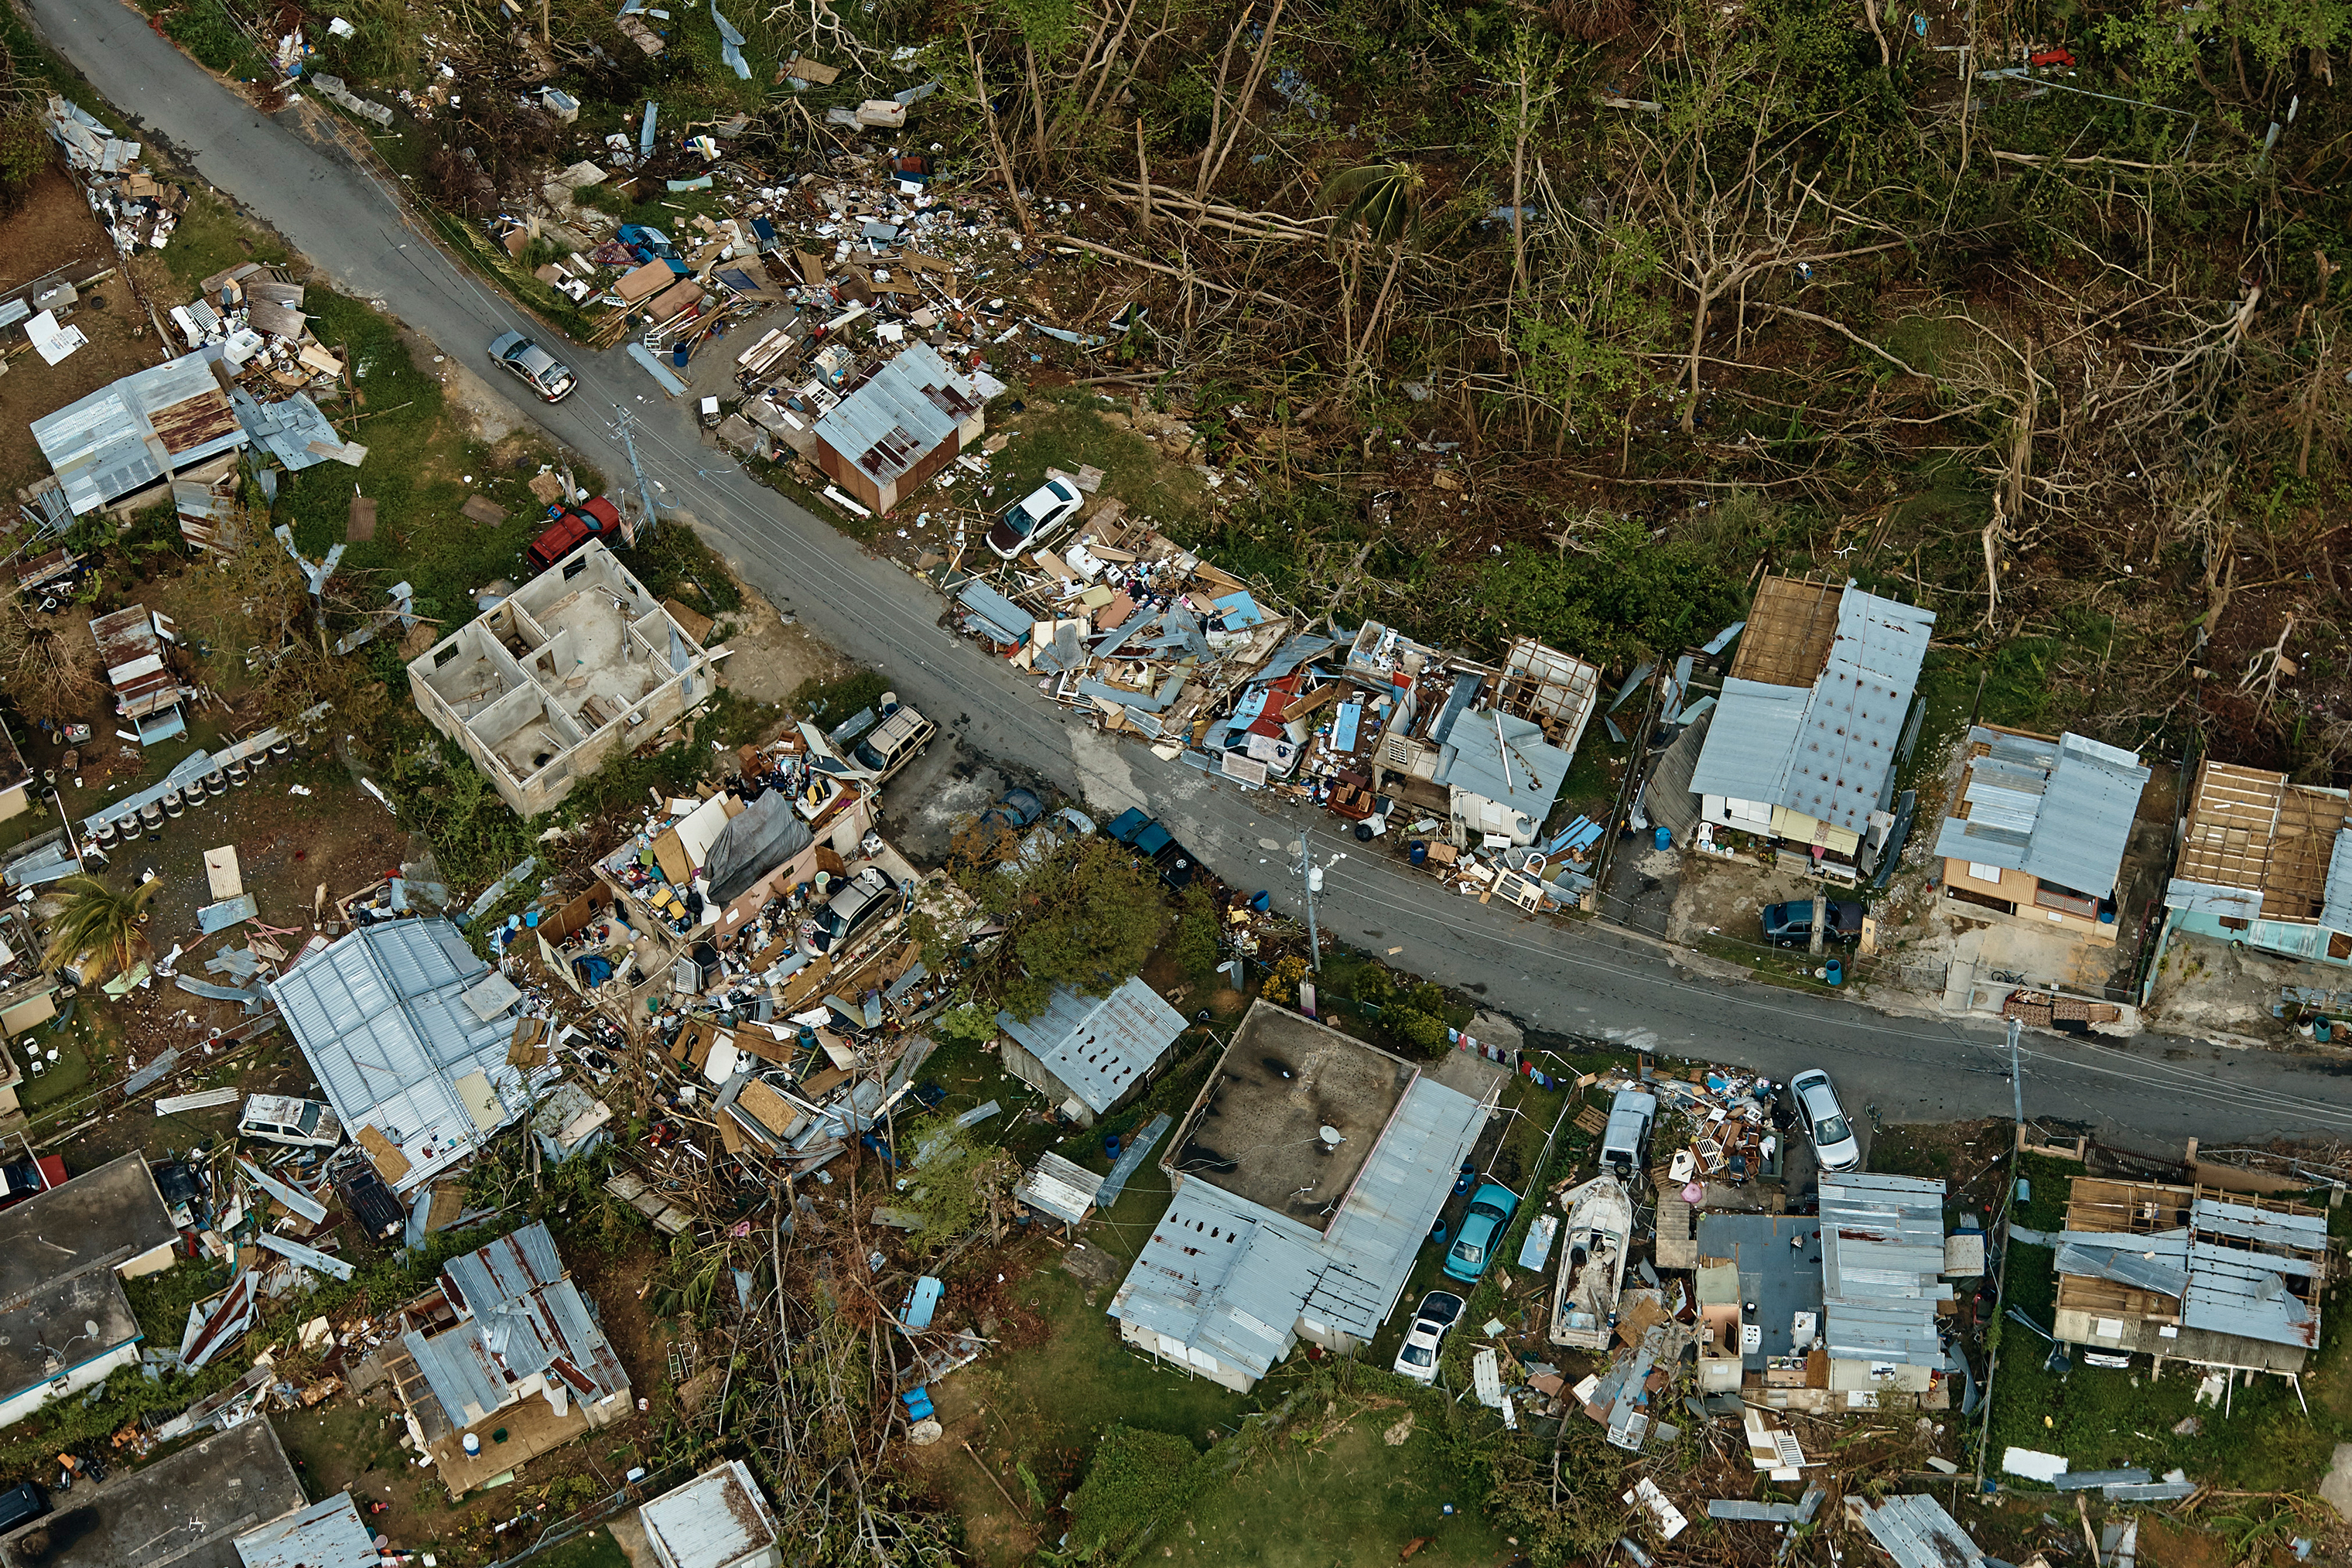 The view from a helicopter over Toa Alta, a town outside San Juan, Puerto Rico, on Oct. 6, 2017. (Andres Kudacki for TIME)